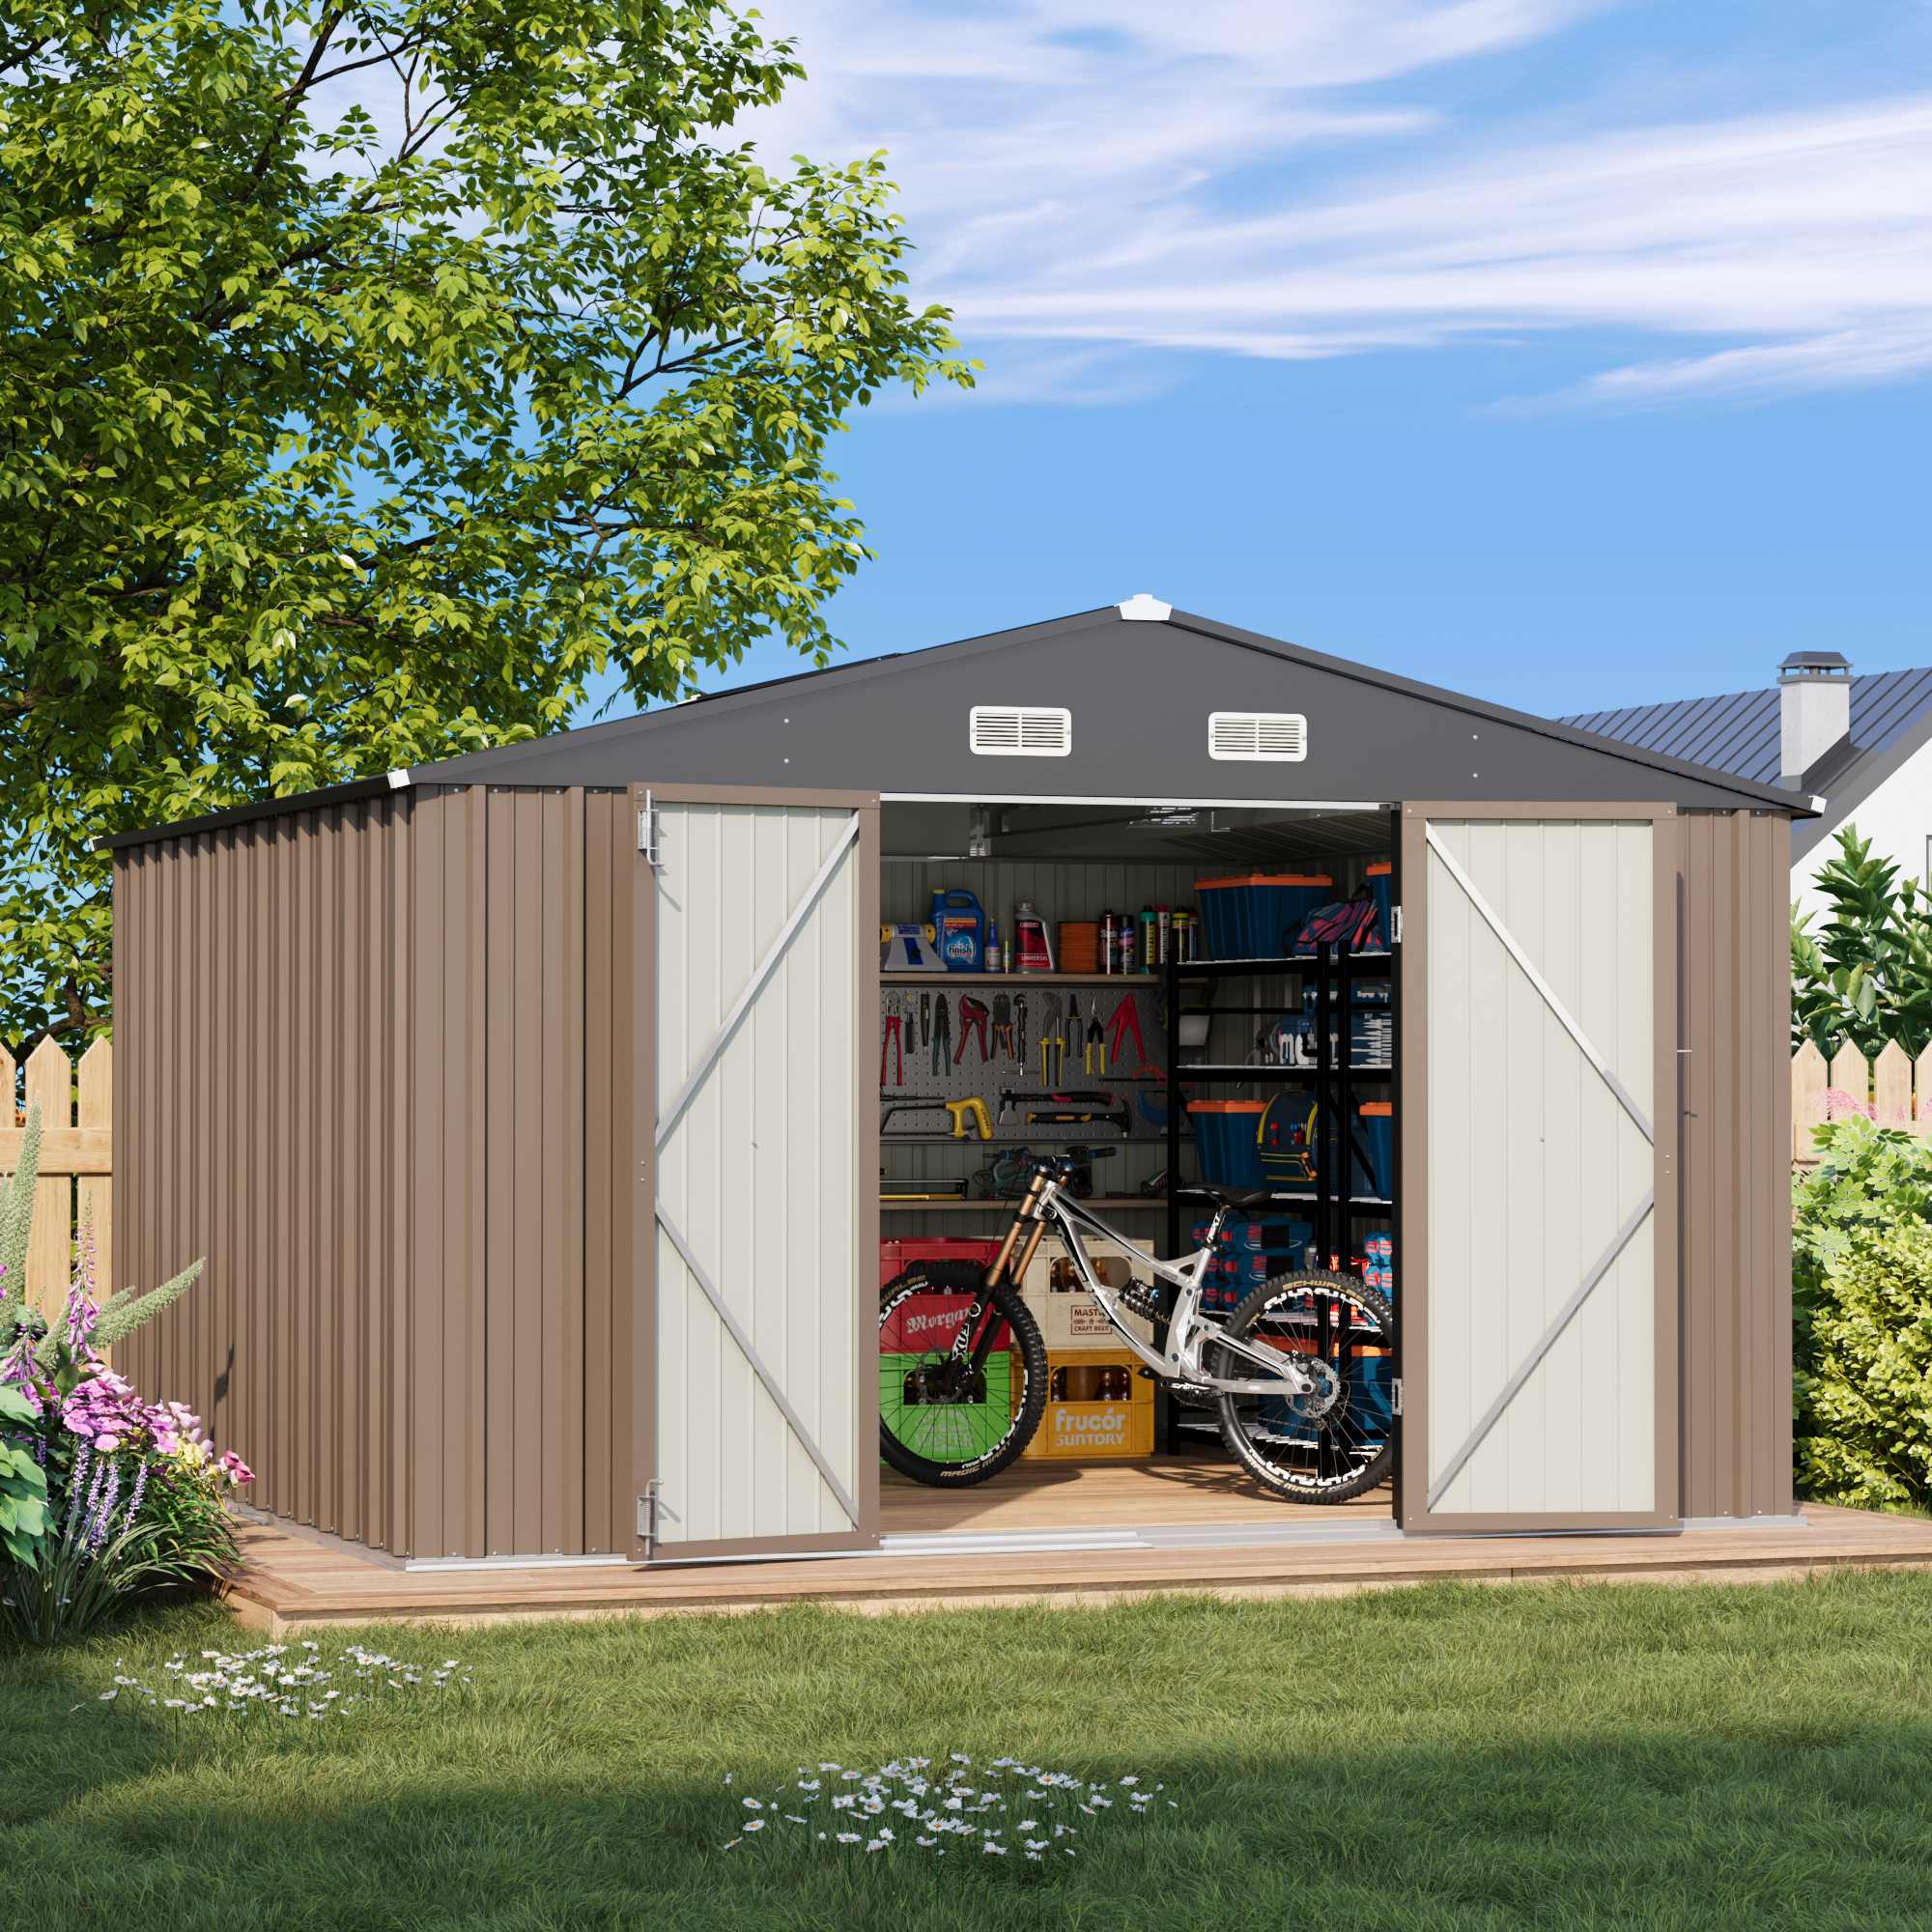 Patiowell Size Upgrade 10 x 10 ft Outdoor Storage Metal Shed with Sloping Roof and Double Lockable Door, Brown - image 1 of 7